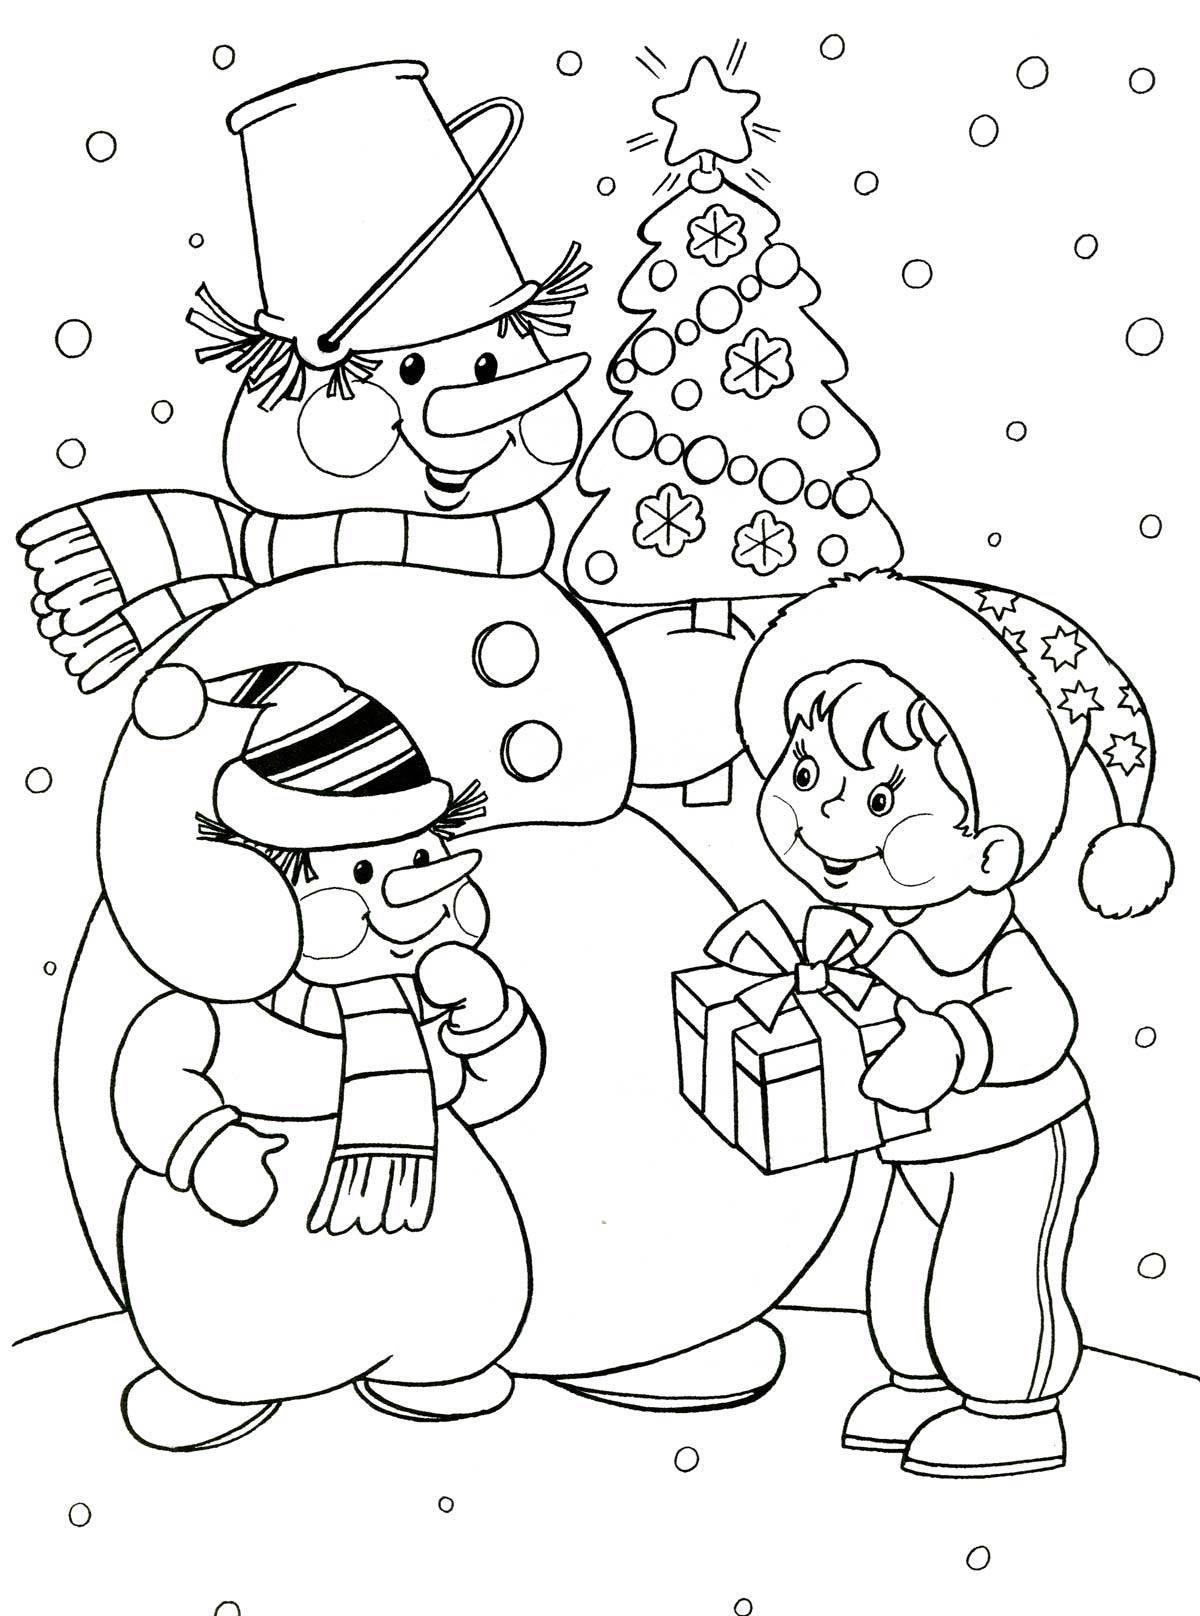 Glorious Christmas coloring book for kids